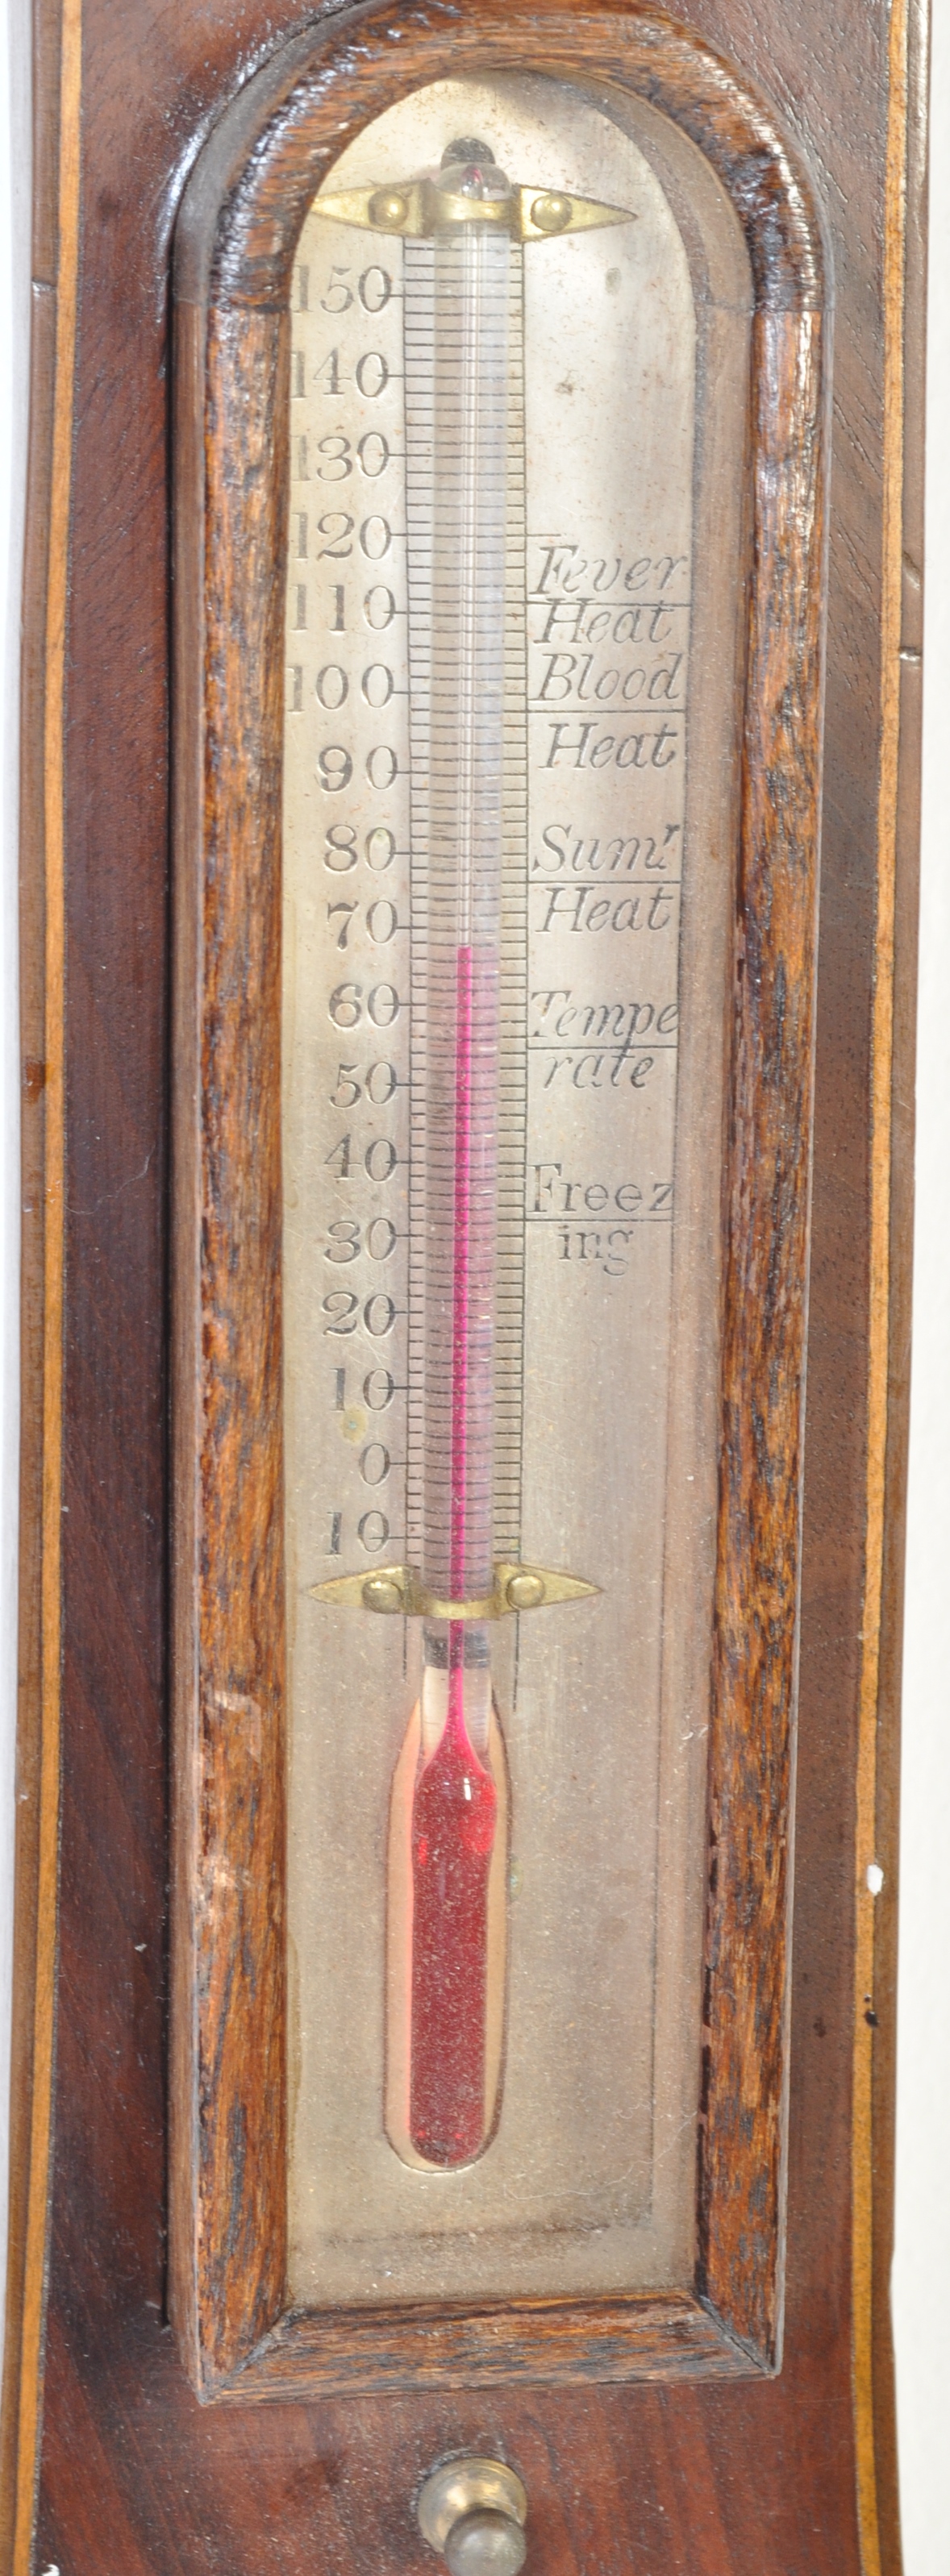 19TH CENTURY VICTORIAN CLOCK AND BAROMETER - Image 7 of 9